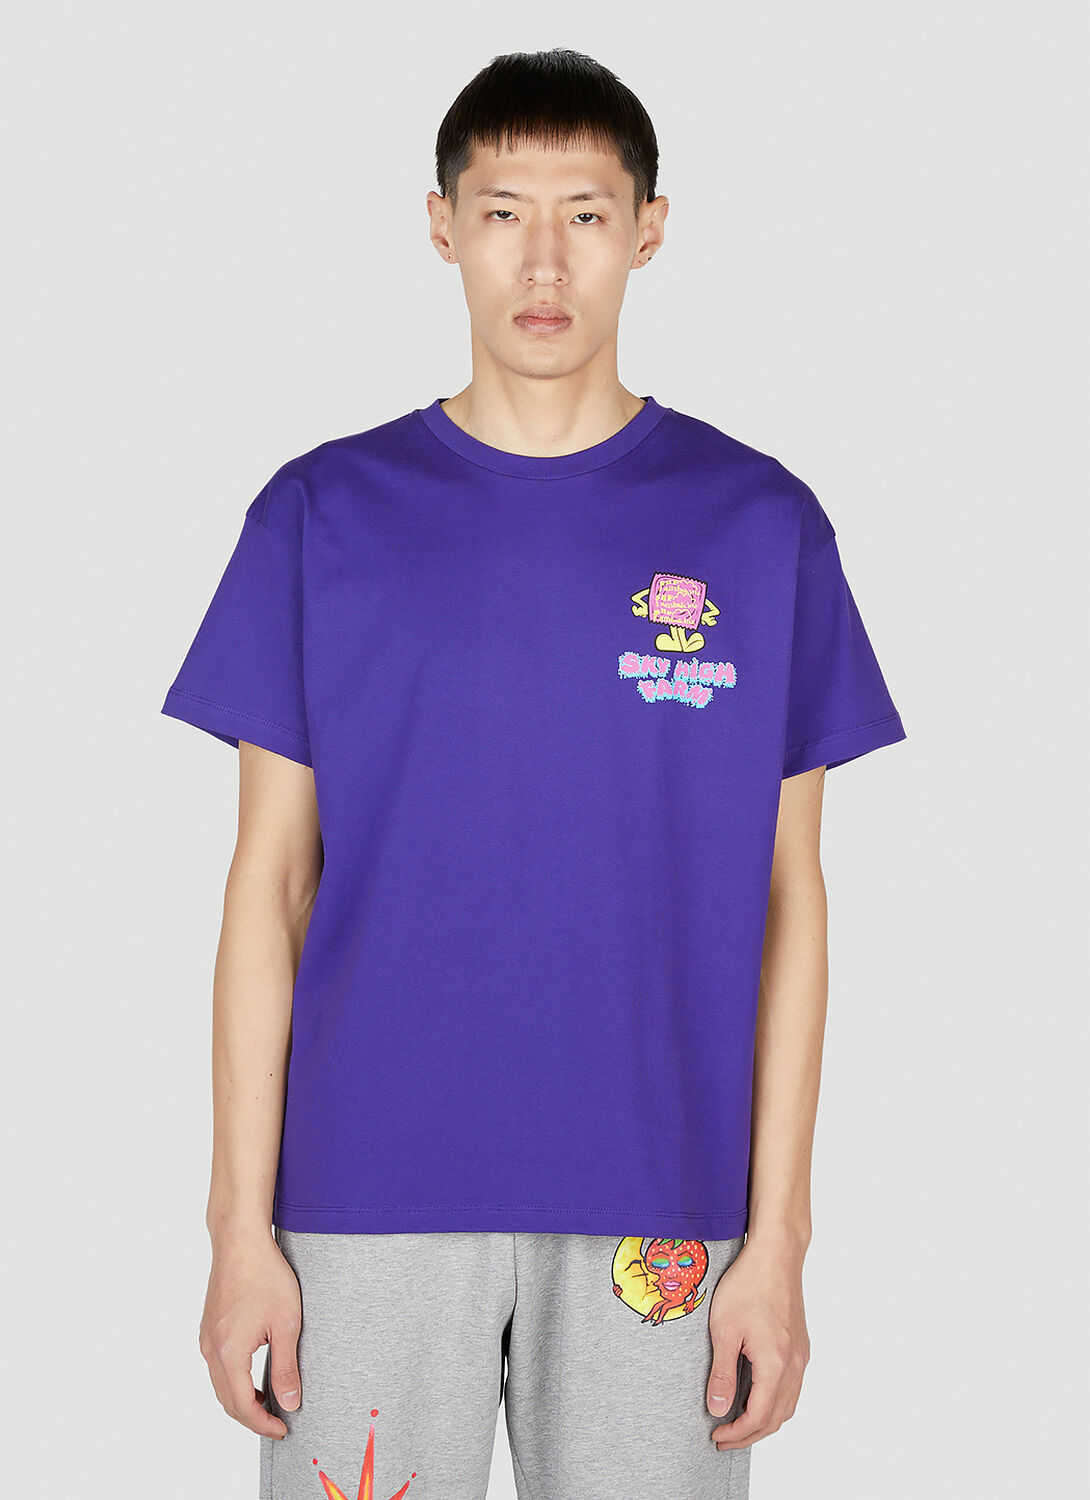 Sky High Farm Workwear Printed Cotton T-shirt In Violet